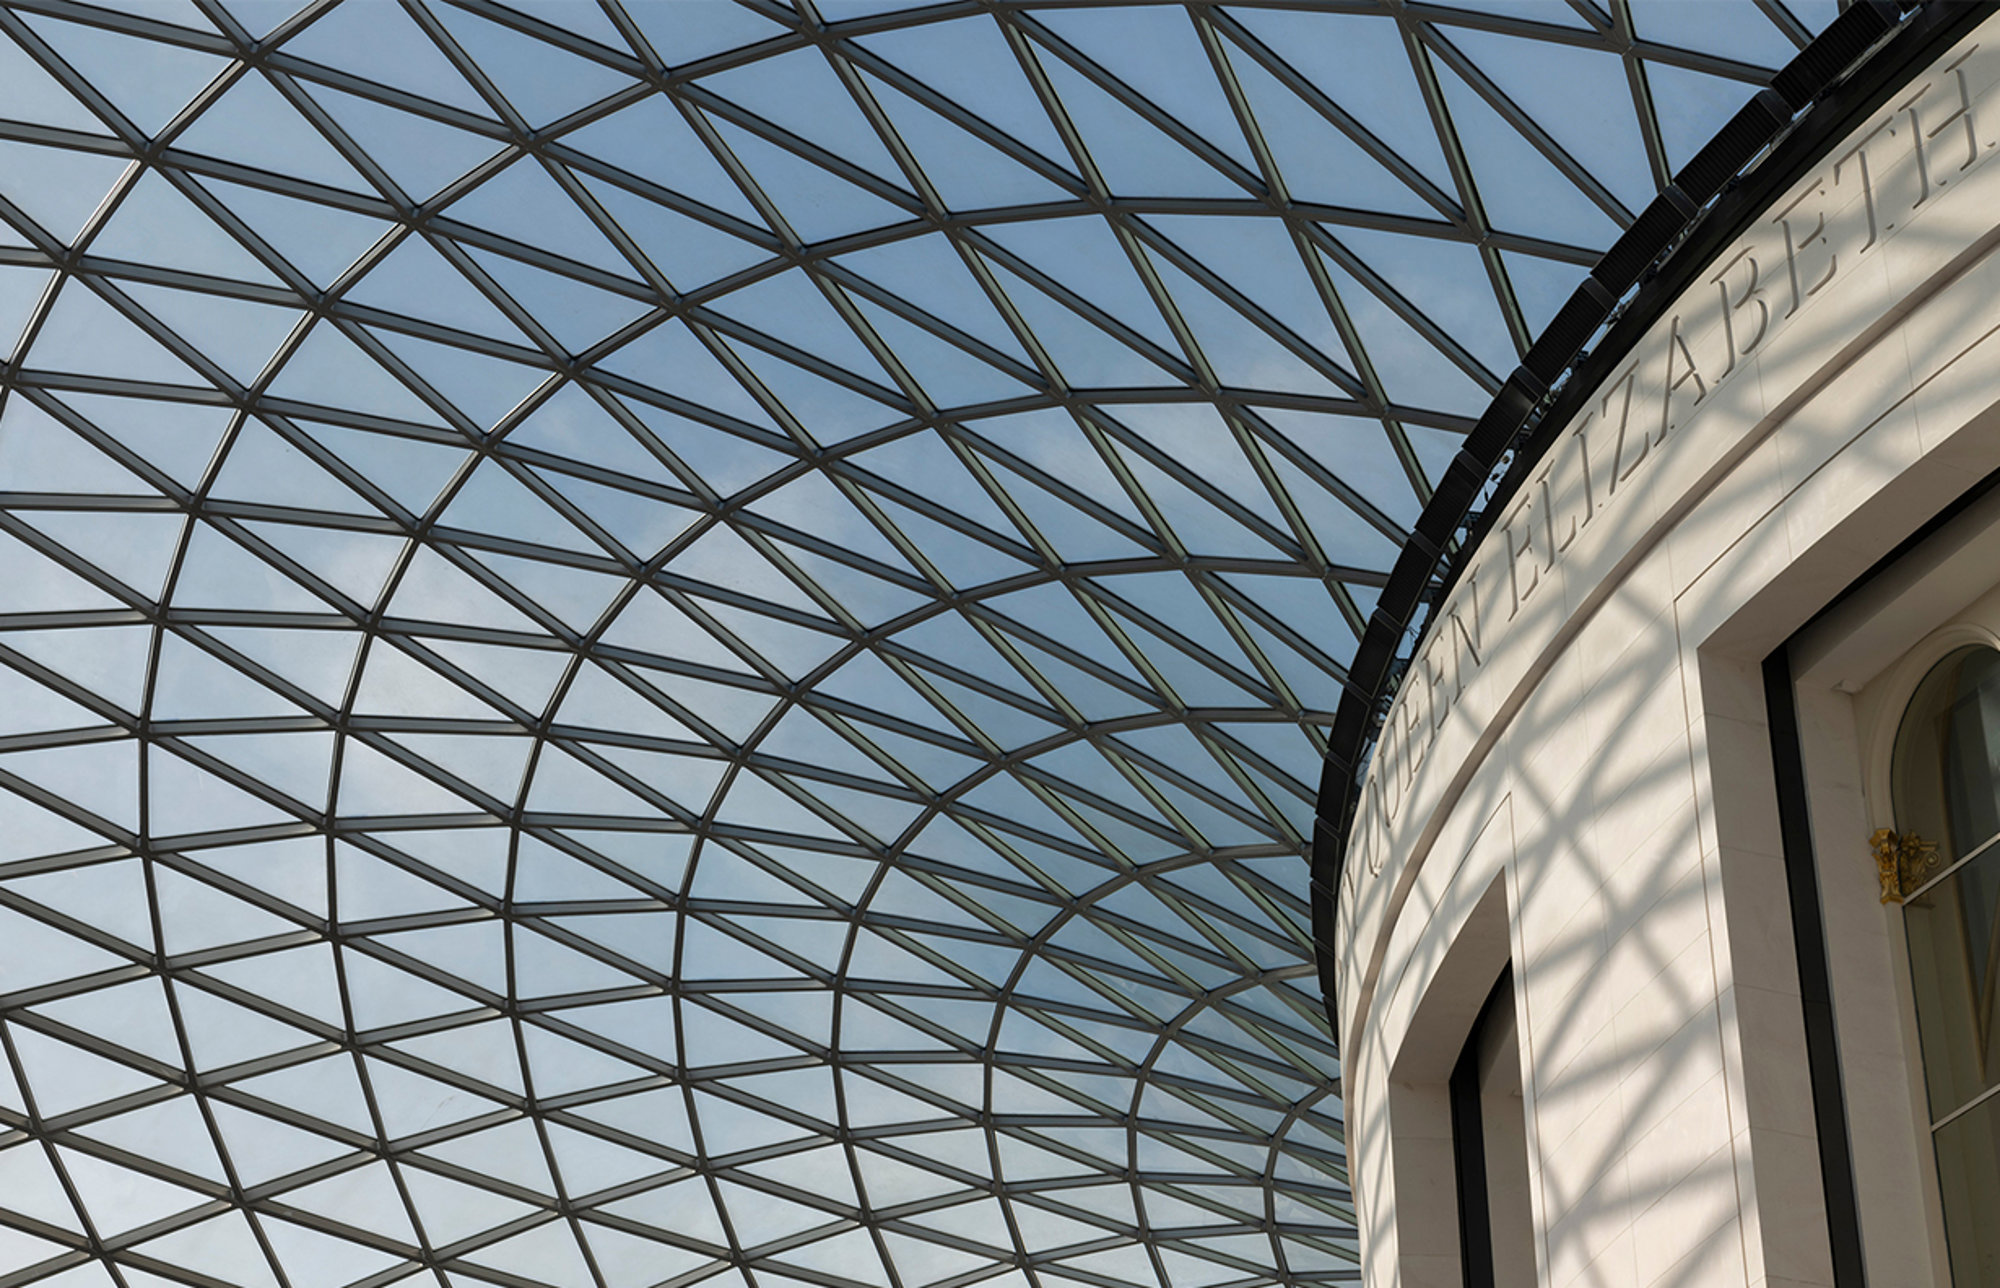 The Great Court at the British Museum turns 20